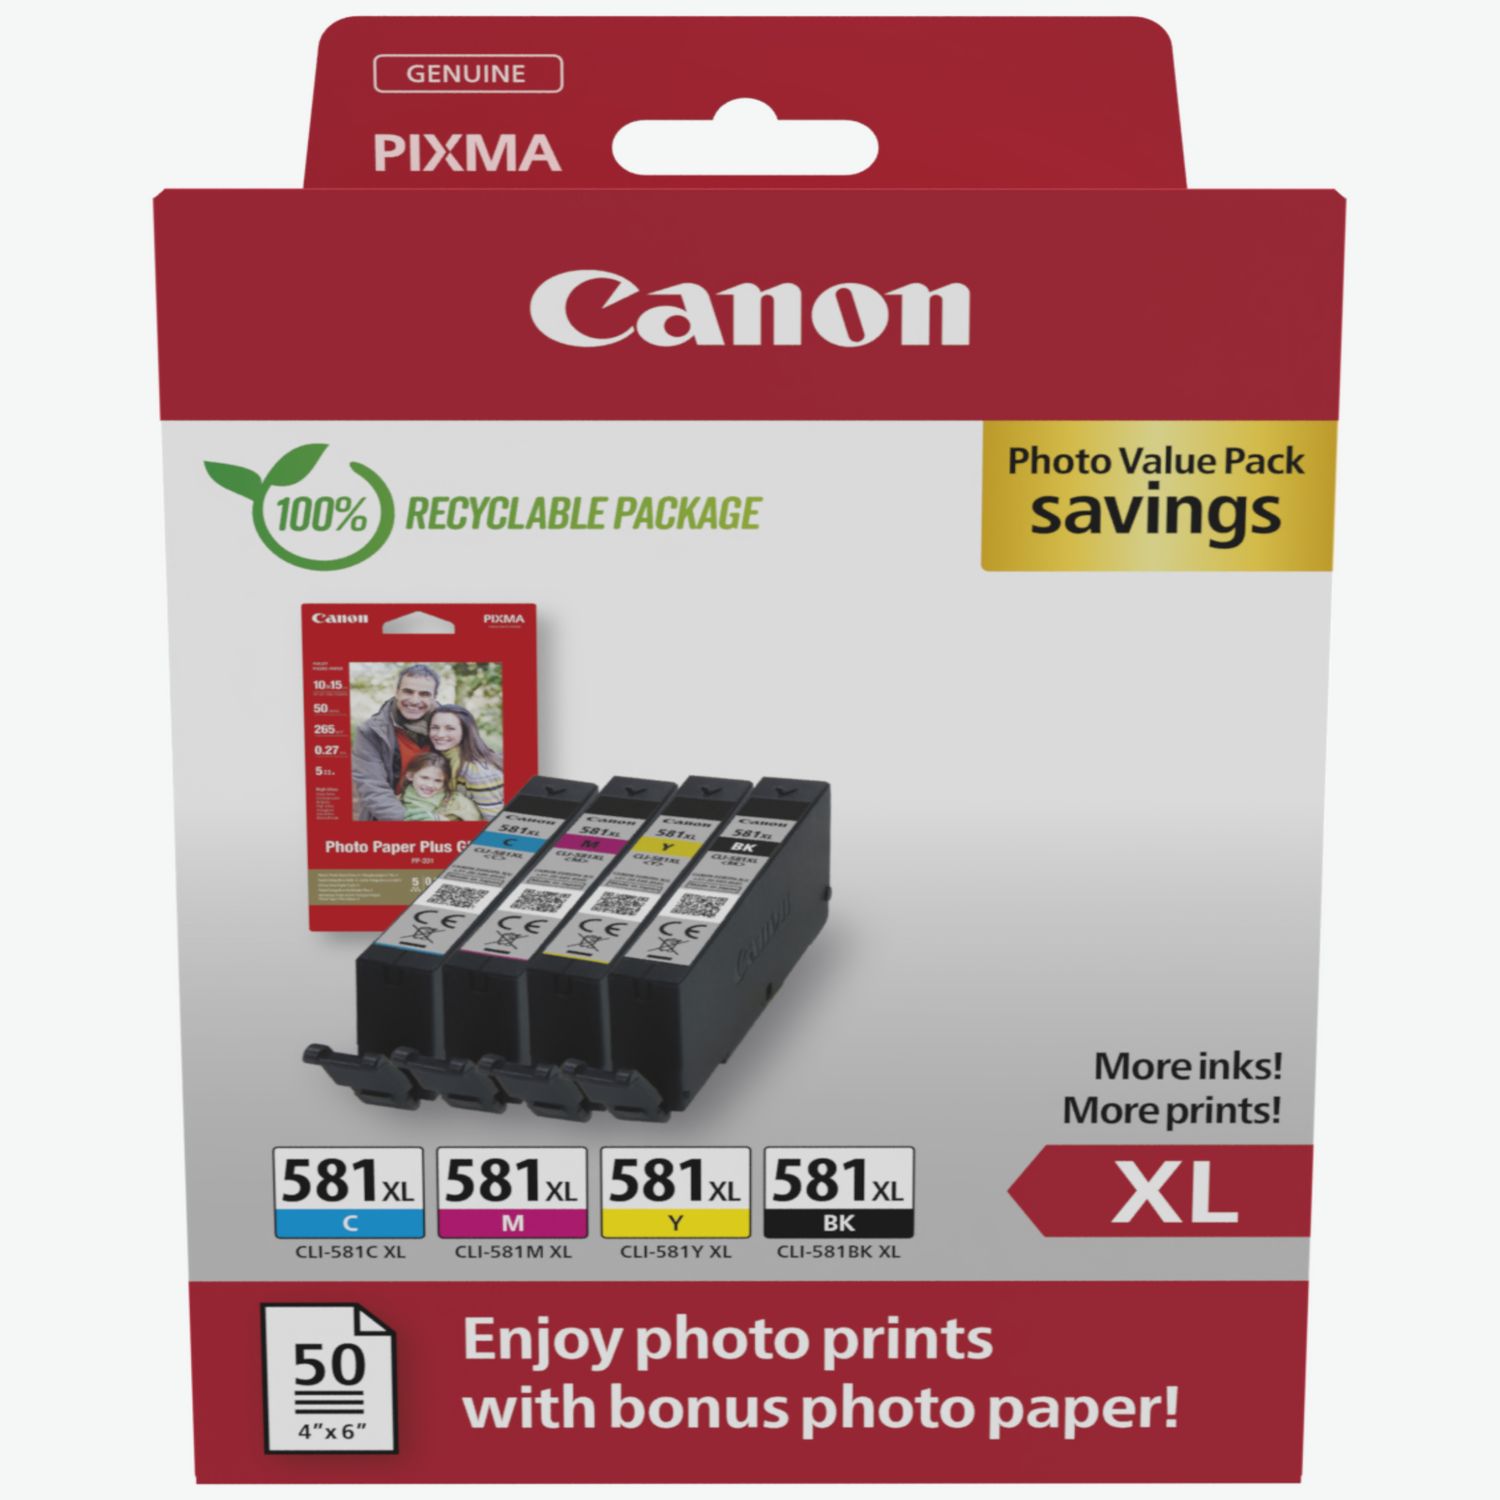 INK CARTRIDGES FOR Canon Pixma TS705 TS705a - Multipack Set of 5